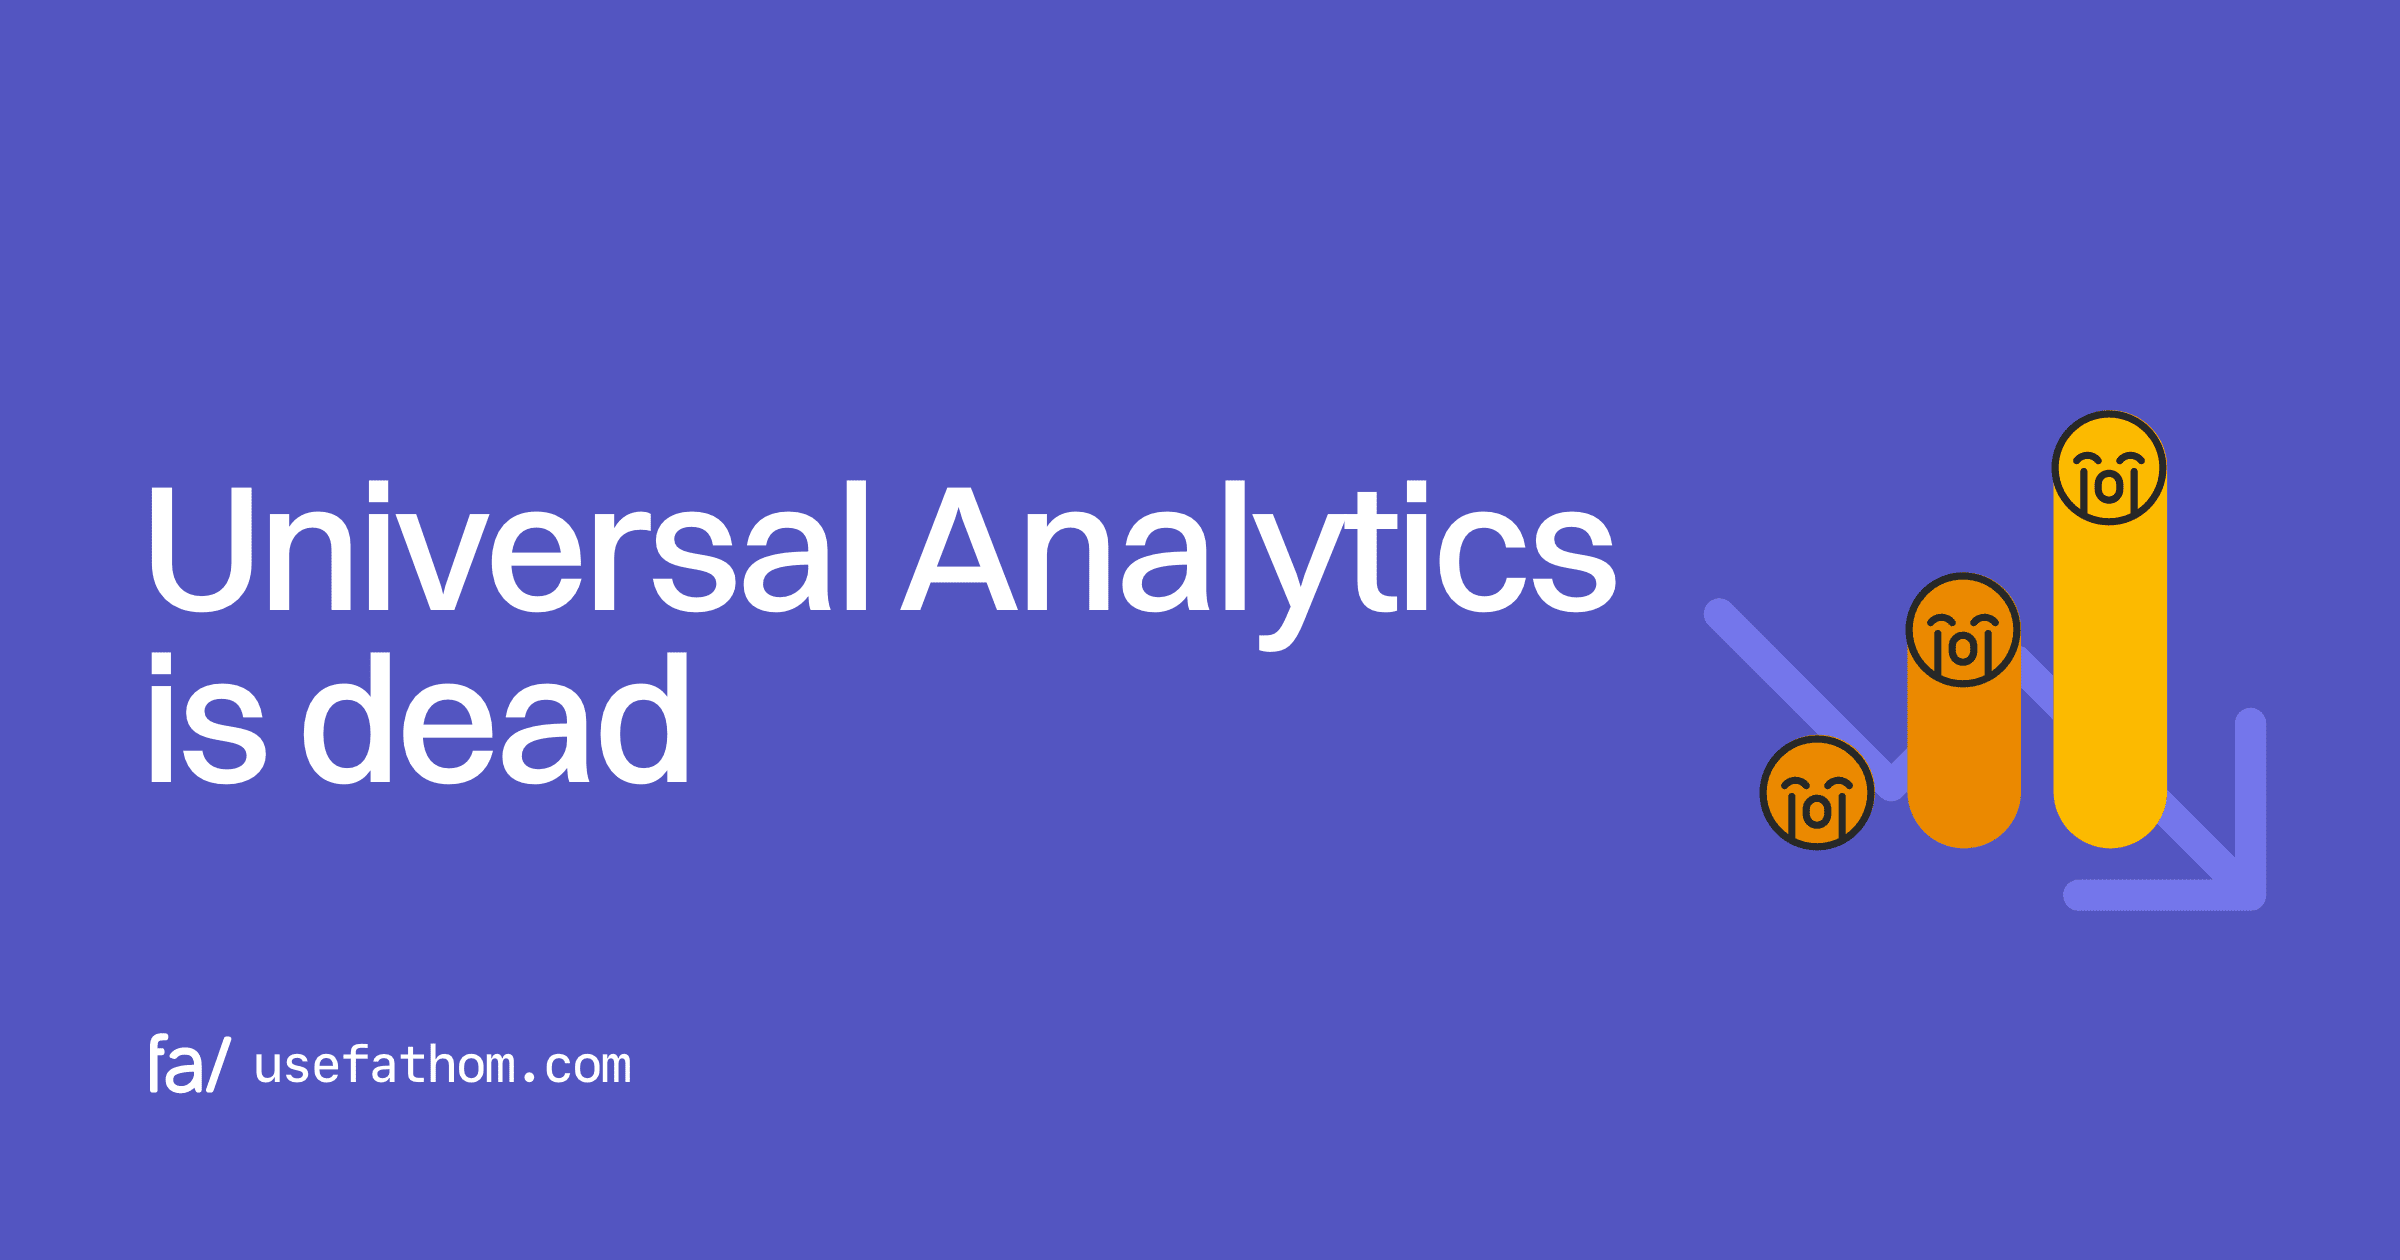 Google Analytics is removing Universal Analytics and deleting all of your historical data